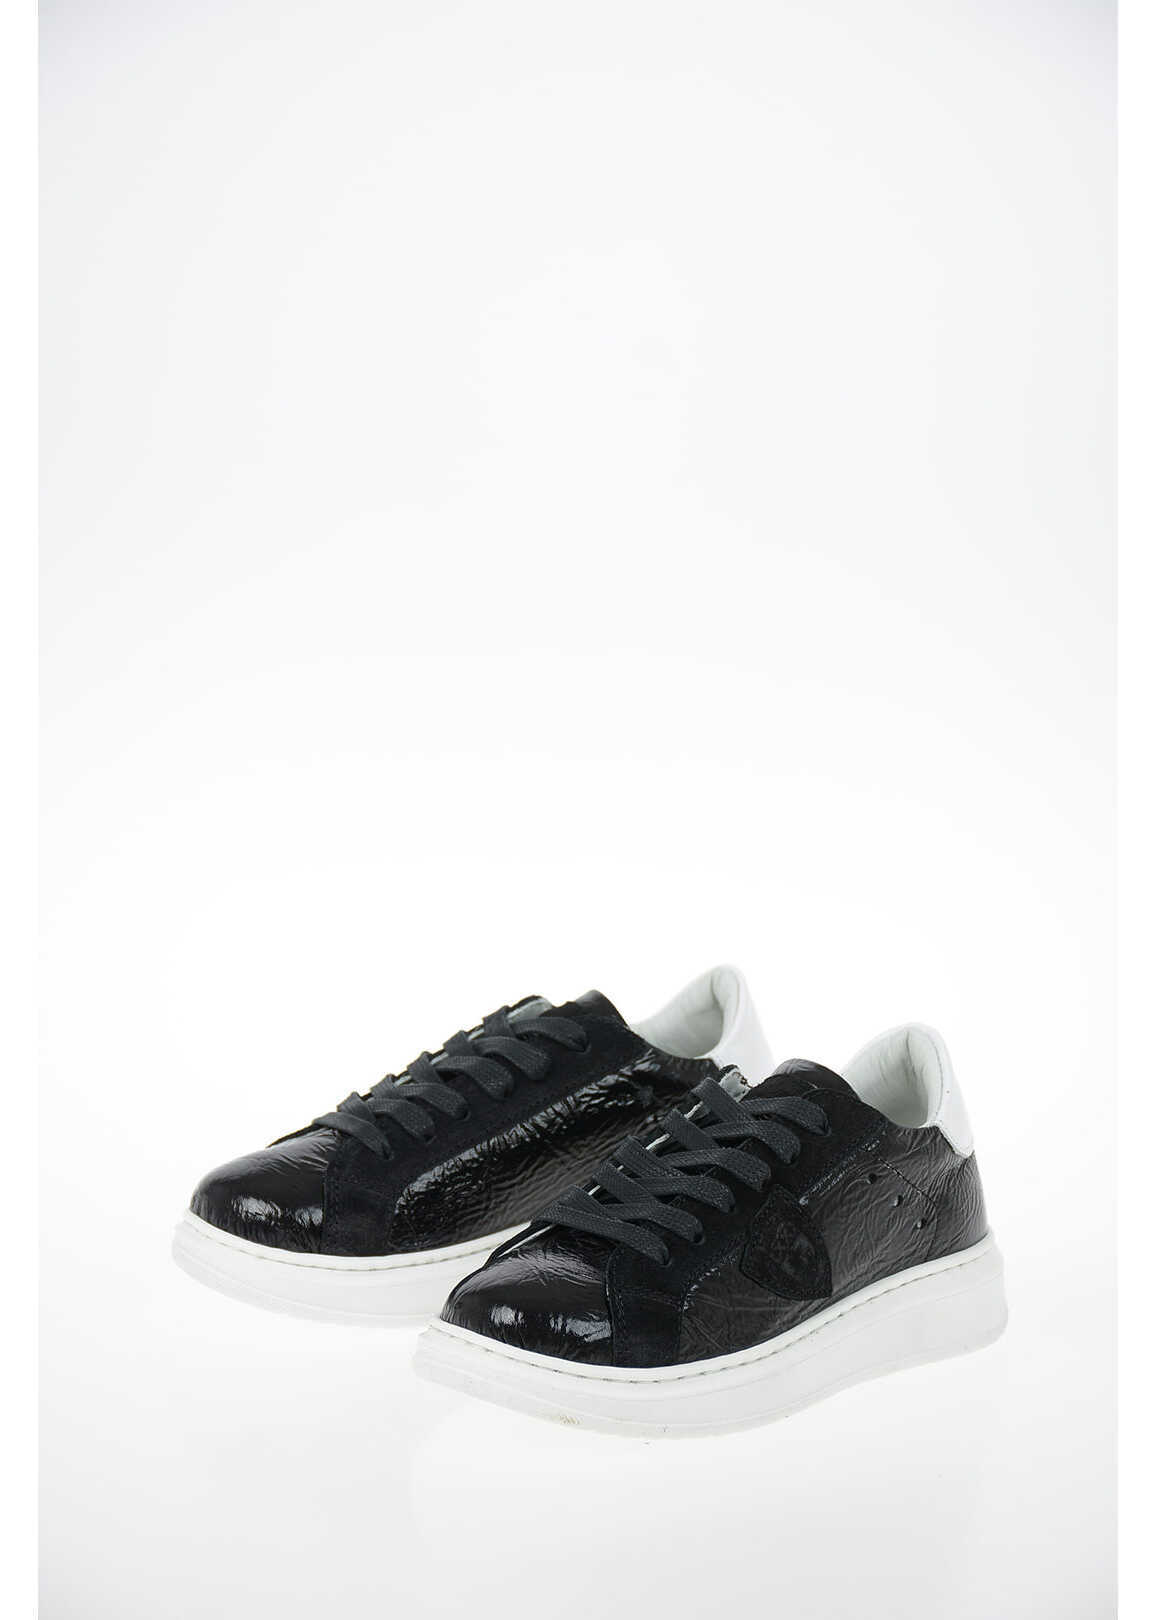 Philippe Model Leather Granville Sneakers Black